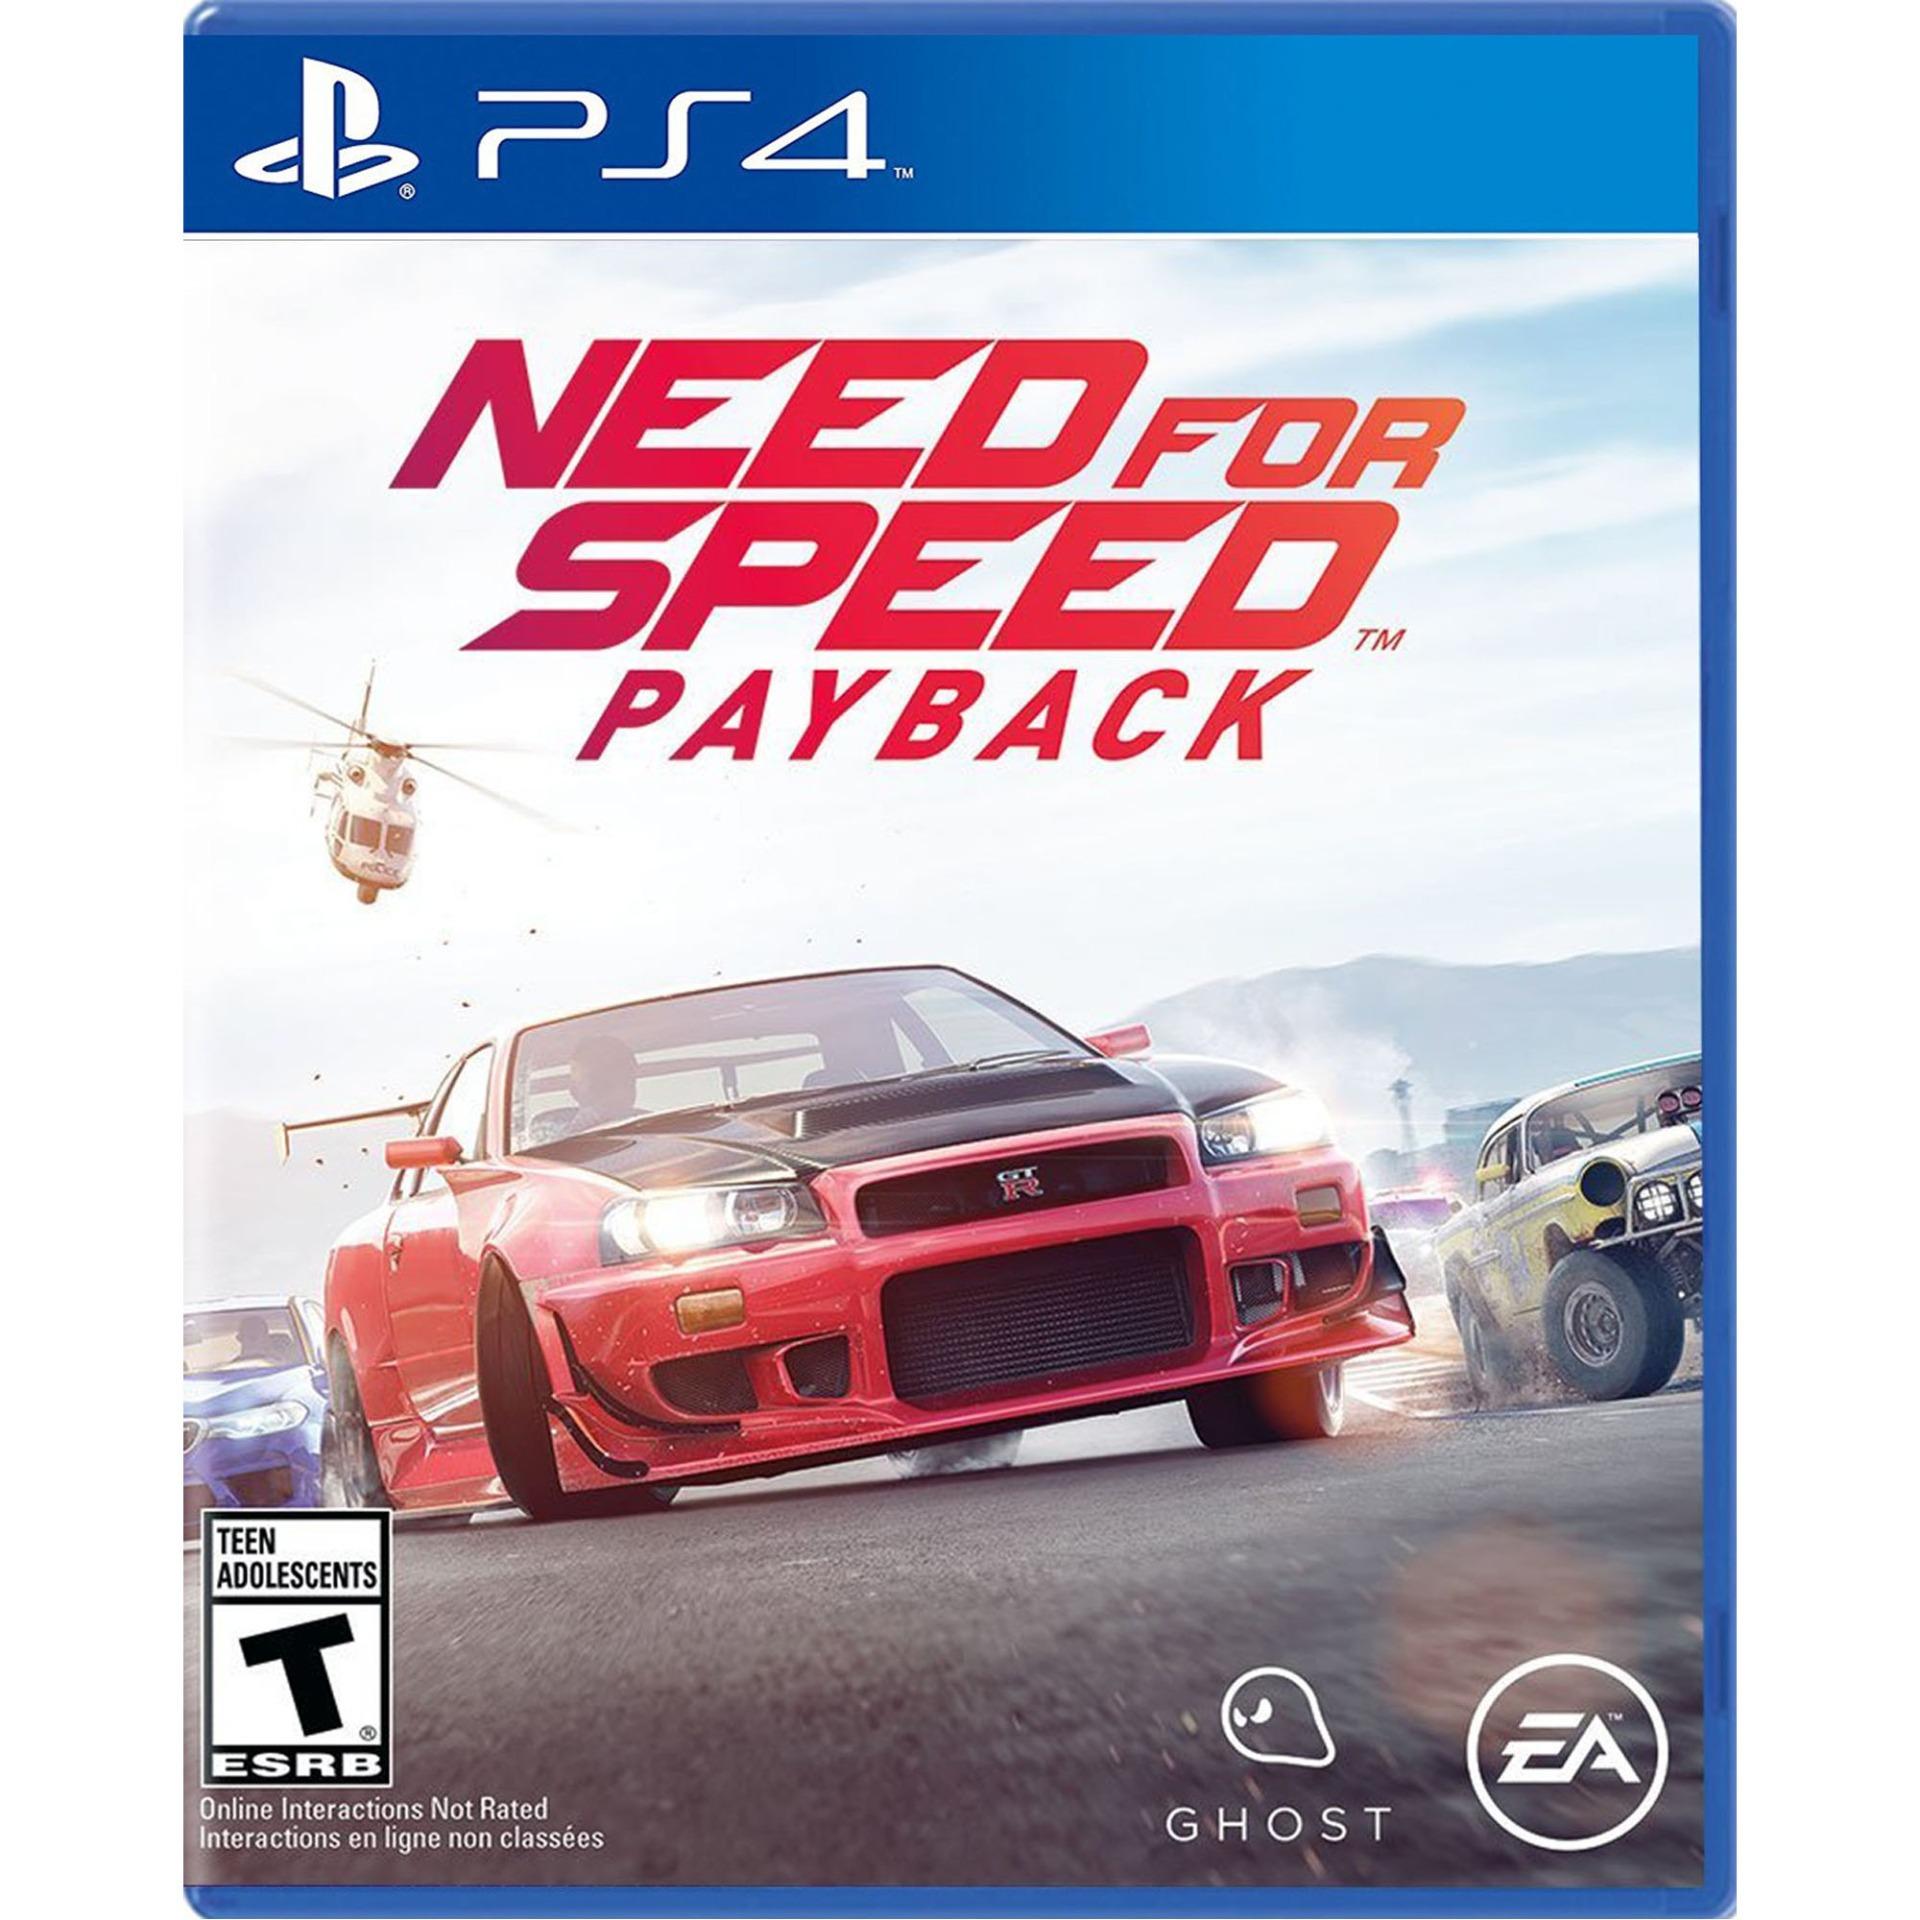 NFS Need for Speed Payback PS4